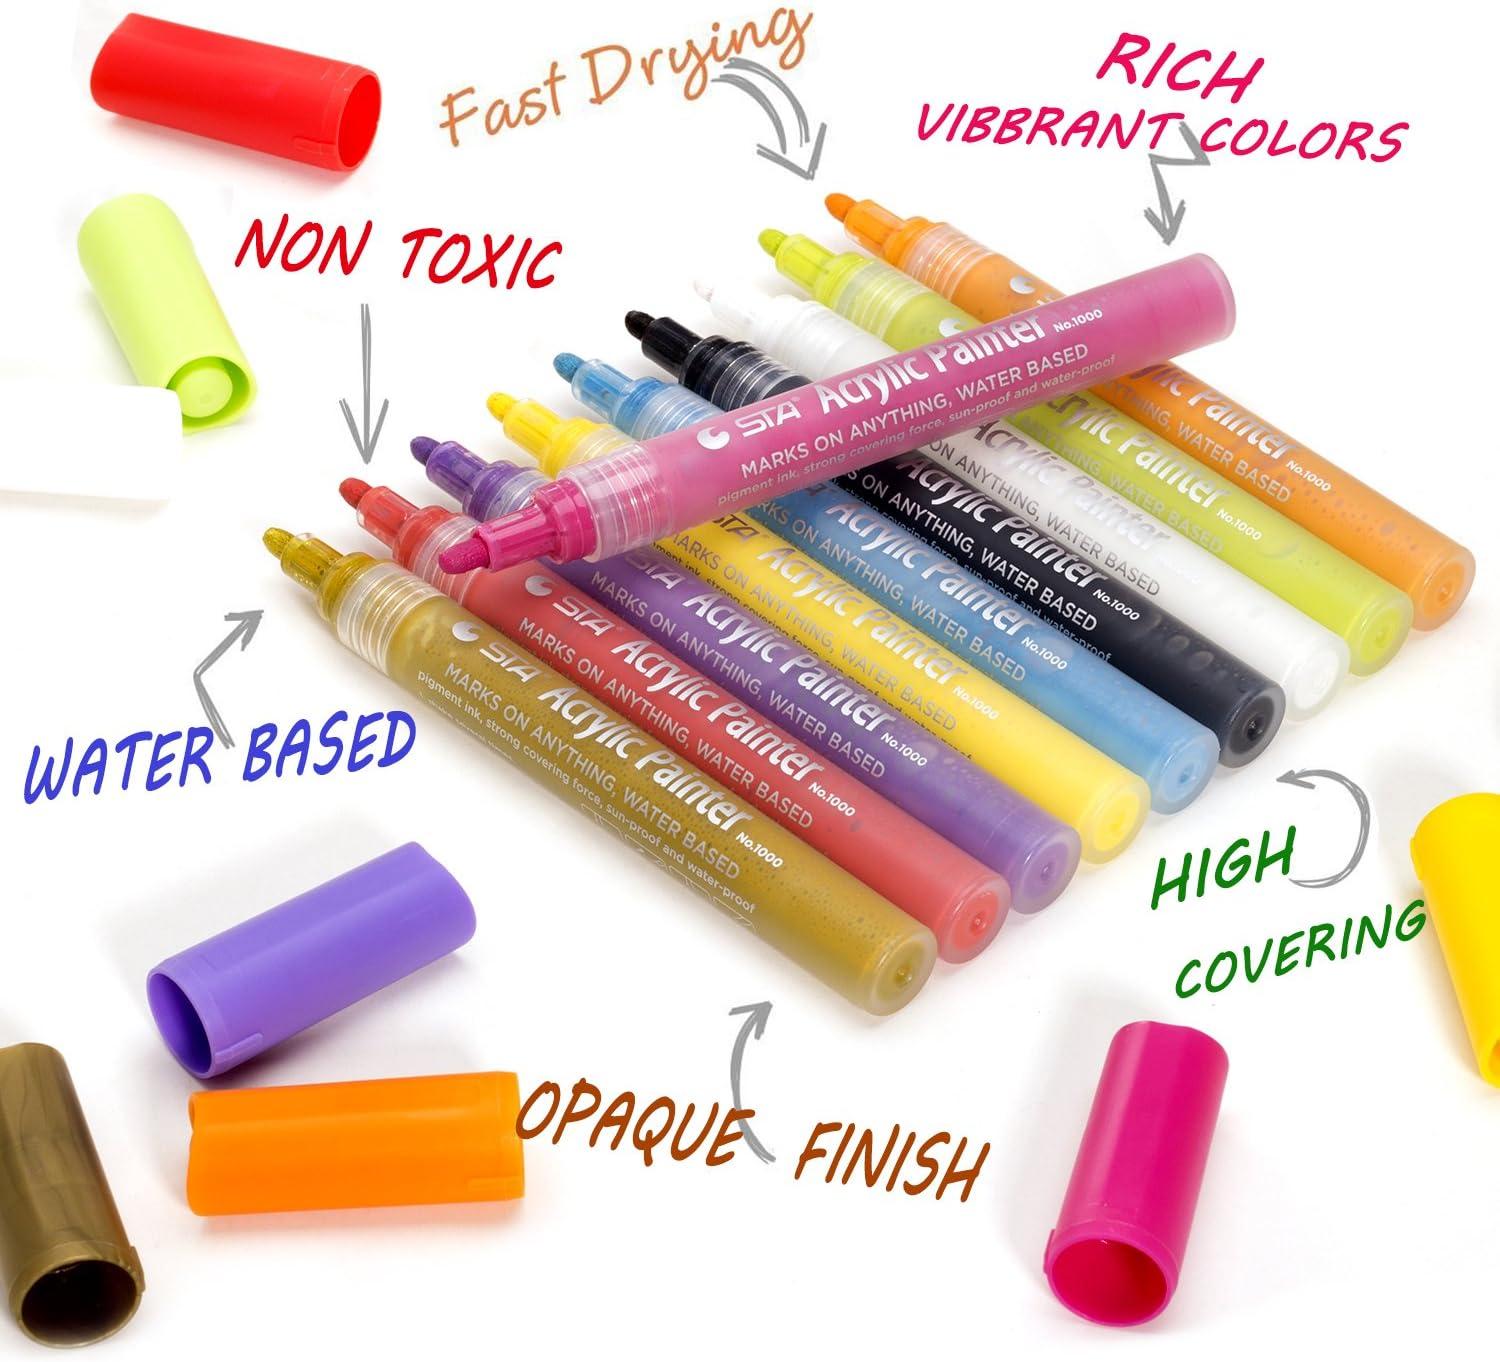  TOOLI-ART Acrylic Paint Pens Assorted Vibrant Markers for Rock  Painting, Canvas, Glass, Mugs, Wood, Fabric, Metal, Ceramics. Non Toxic,  Quick Dry, Multi-Surface, Lightfast (EXTRA FINE) : Arts, Crafts & Sewing